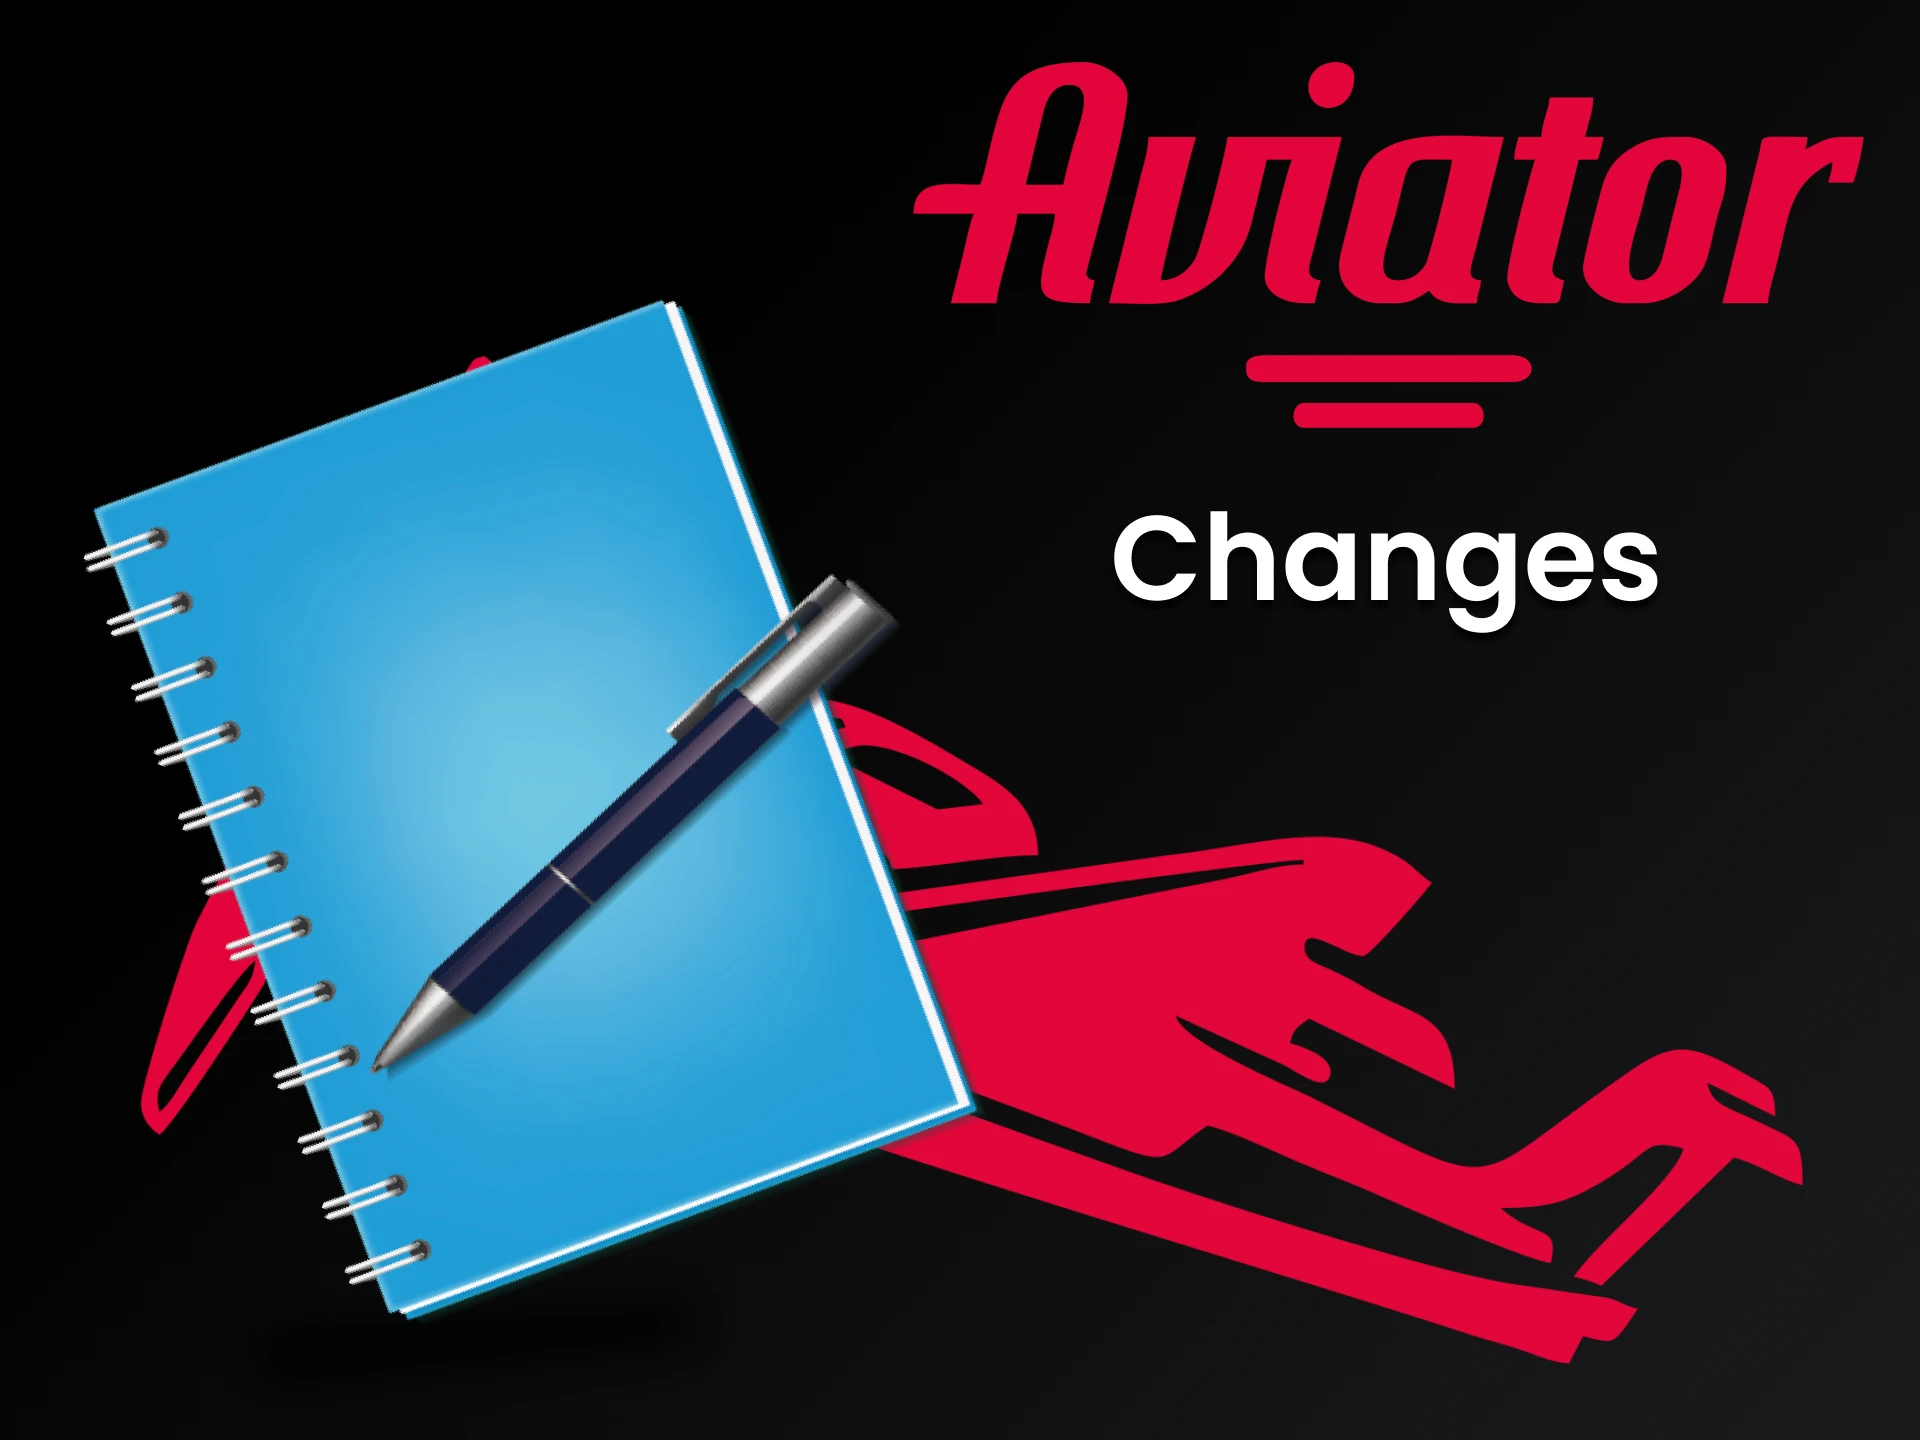 The privacy policy may change on the Aviator website.